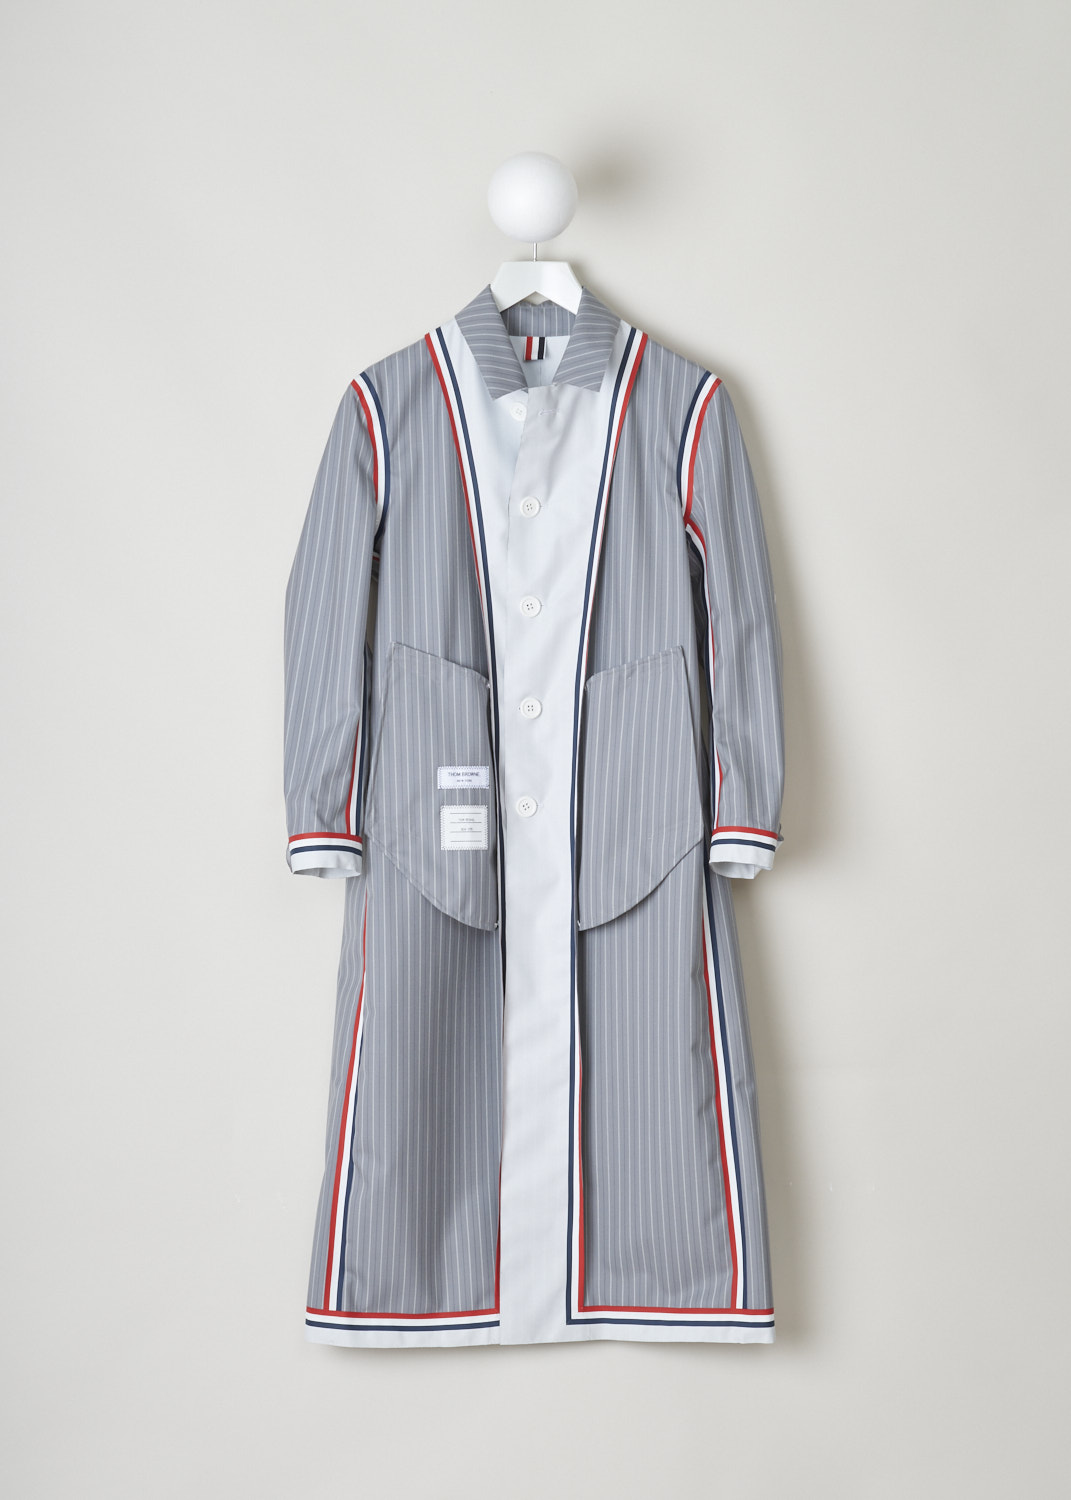 Thom Browne, Double sided water repellent overcoat, FOC454D_04358_035, grey, print, front, Light grey pinstripe on one side and a mid-grey pinstripe motif on the other. So basically you are getting 2 overcoats for the price of one. featuring a pointed collar, long cuffed sleeves with functional buttons. A fun little detail about the buttons are they are made of rubber so they feel a certain way and are a bit flexible.   